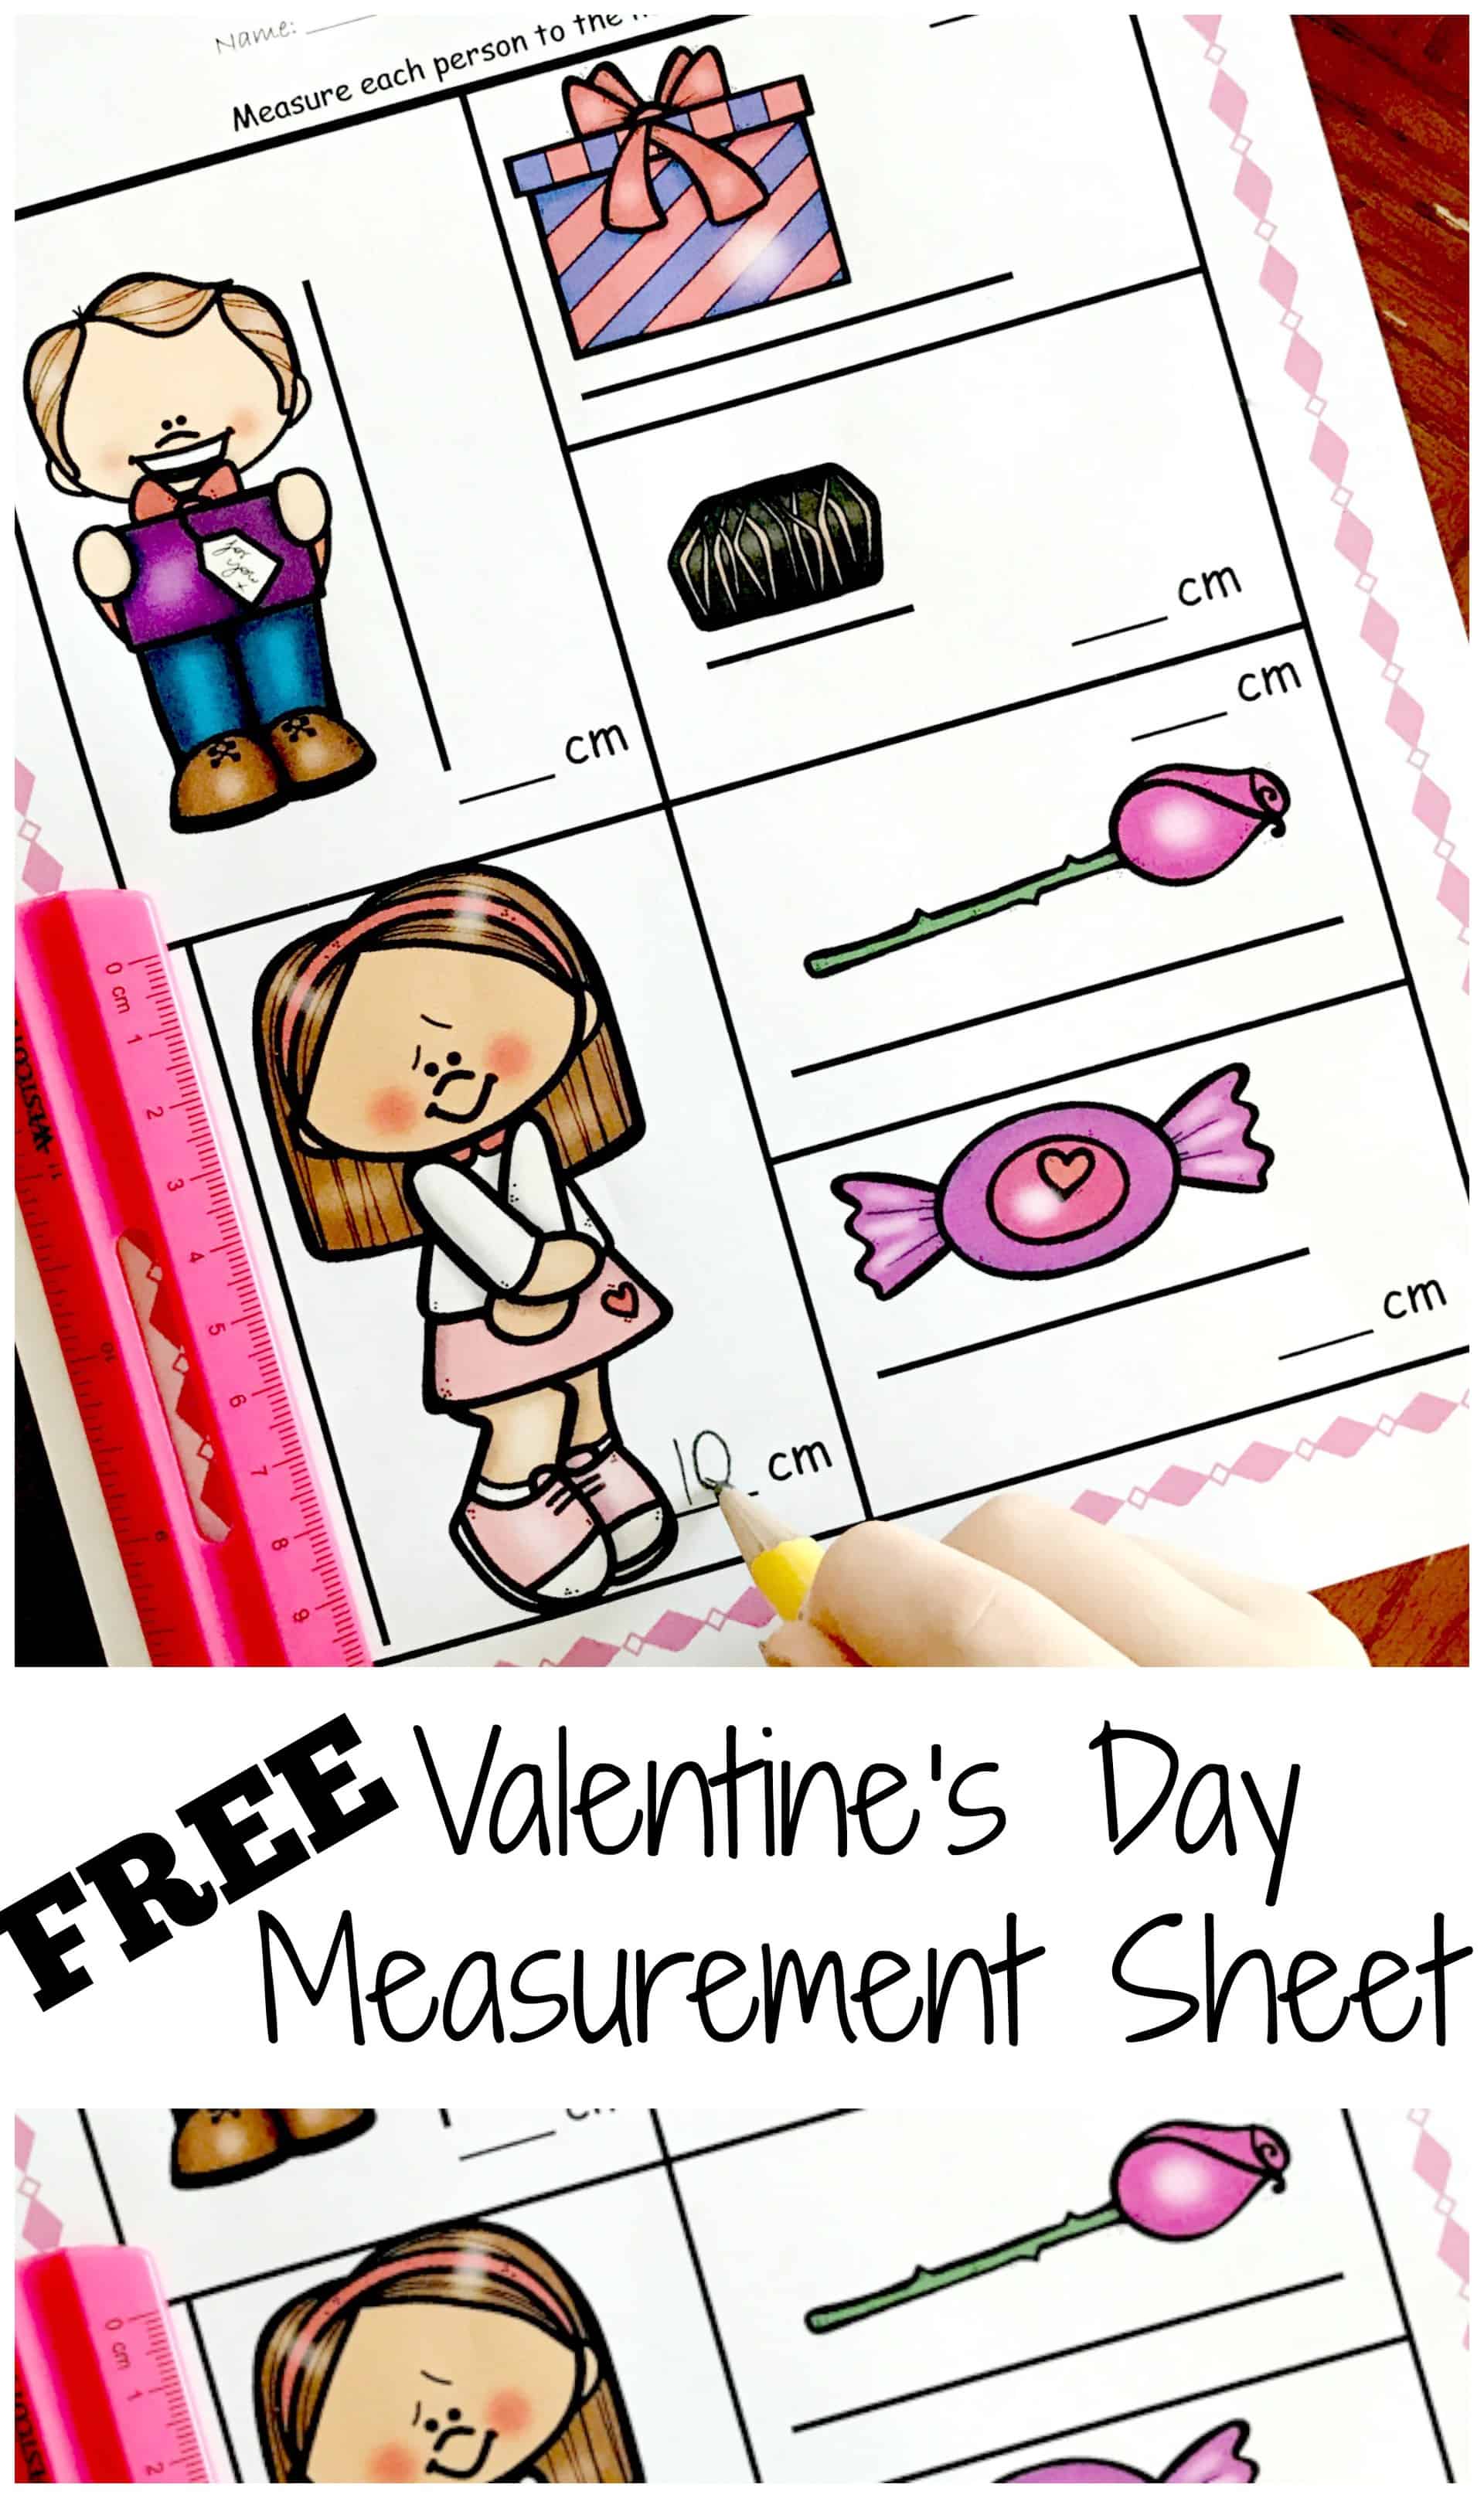 FREE Measuring Centimeters Worksheet with a Valentine's Day Theme